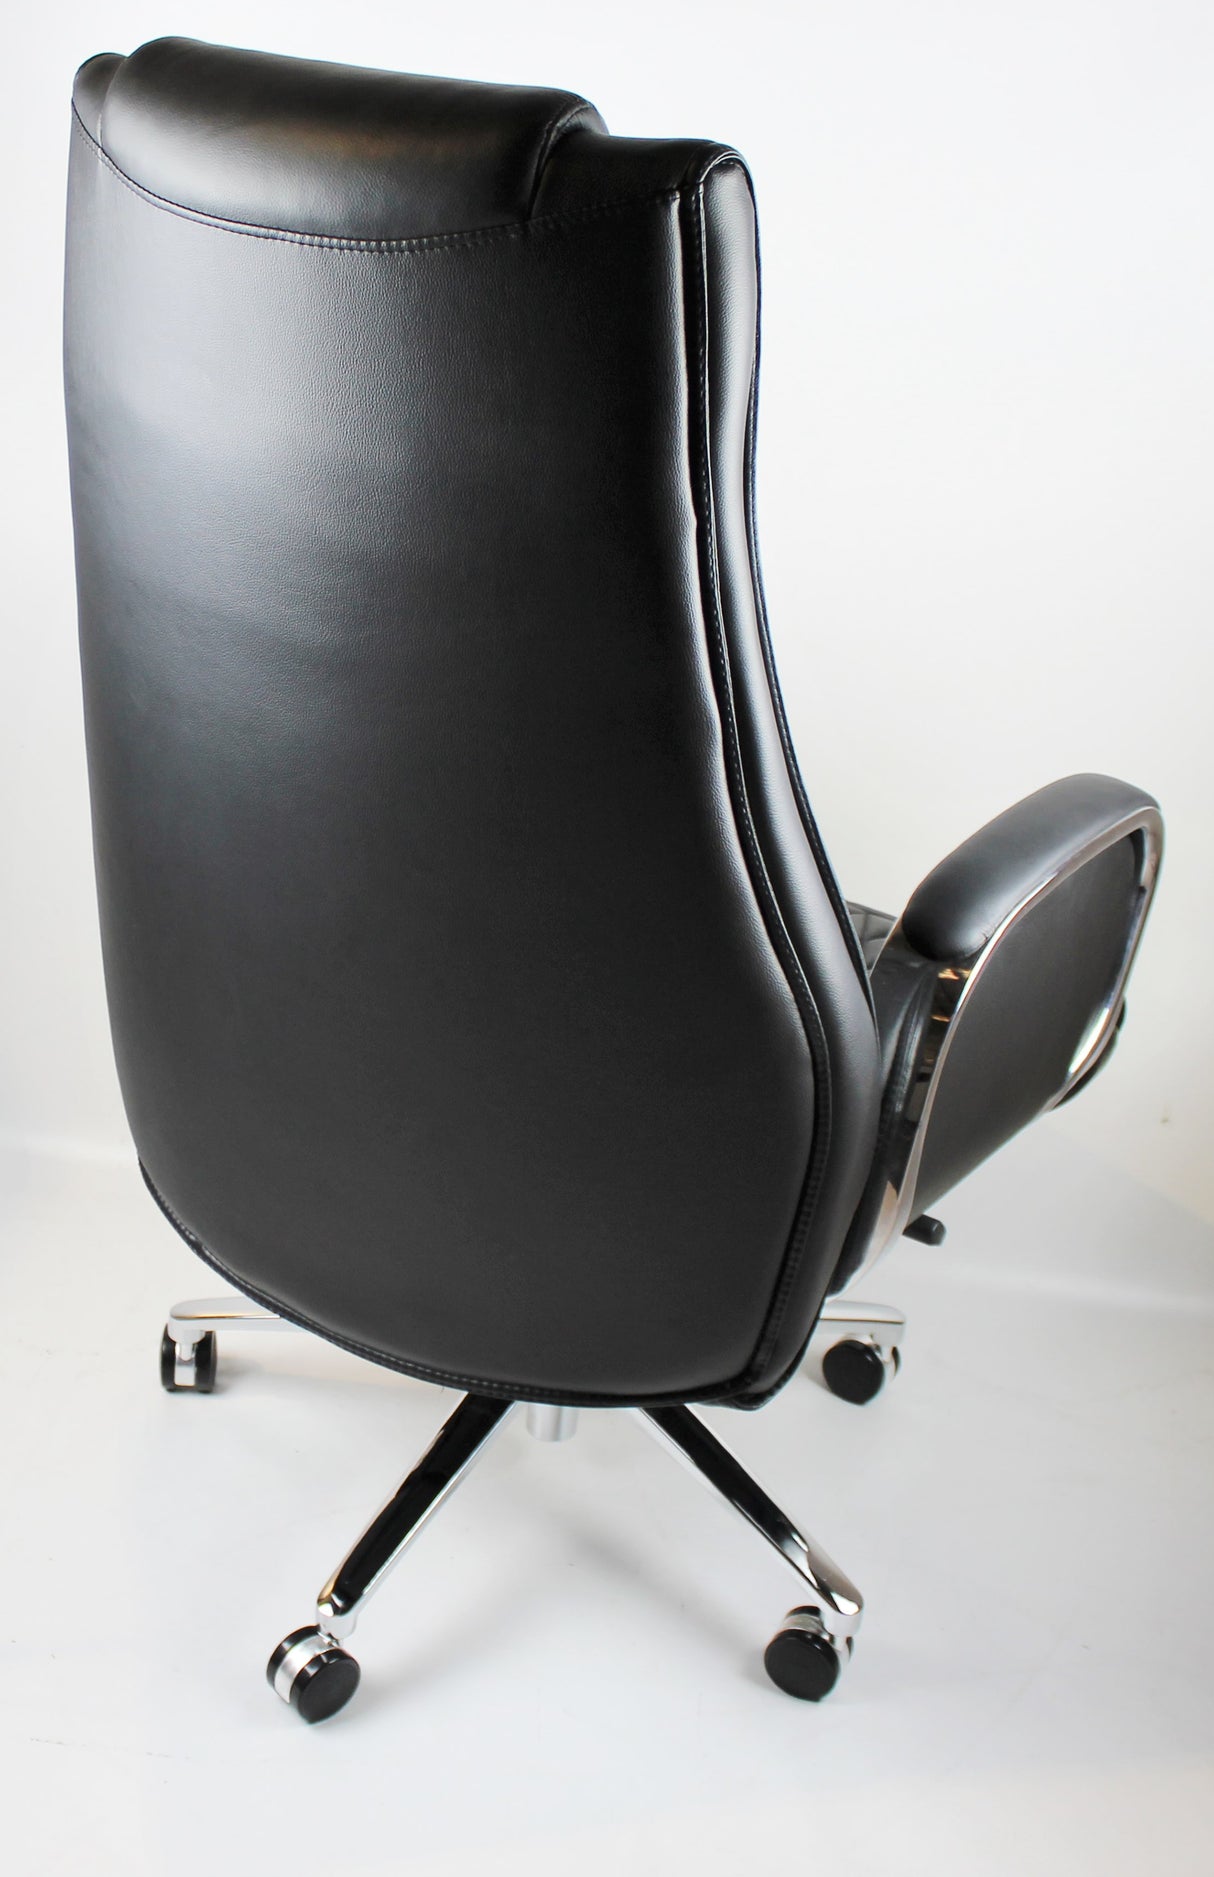 Black Leather Executive Office Chair - CHA-1202A